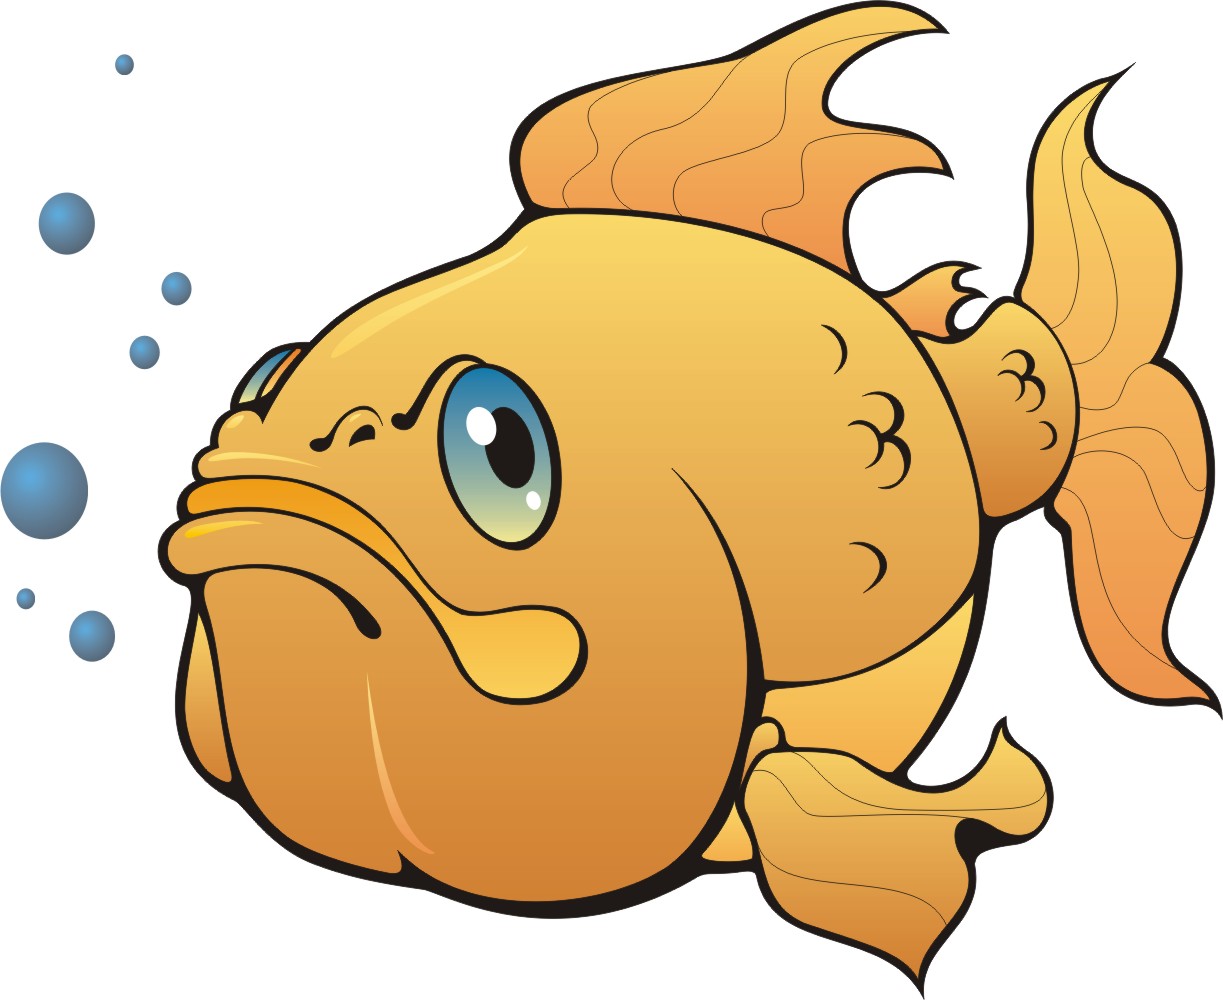 Funny Looking Cartoon Fish Images & Pictures - Becuo